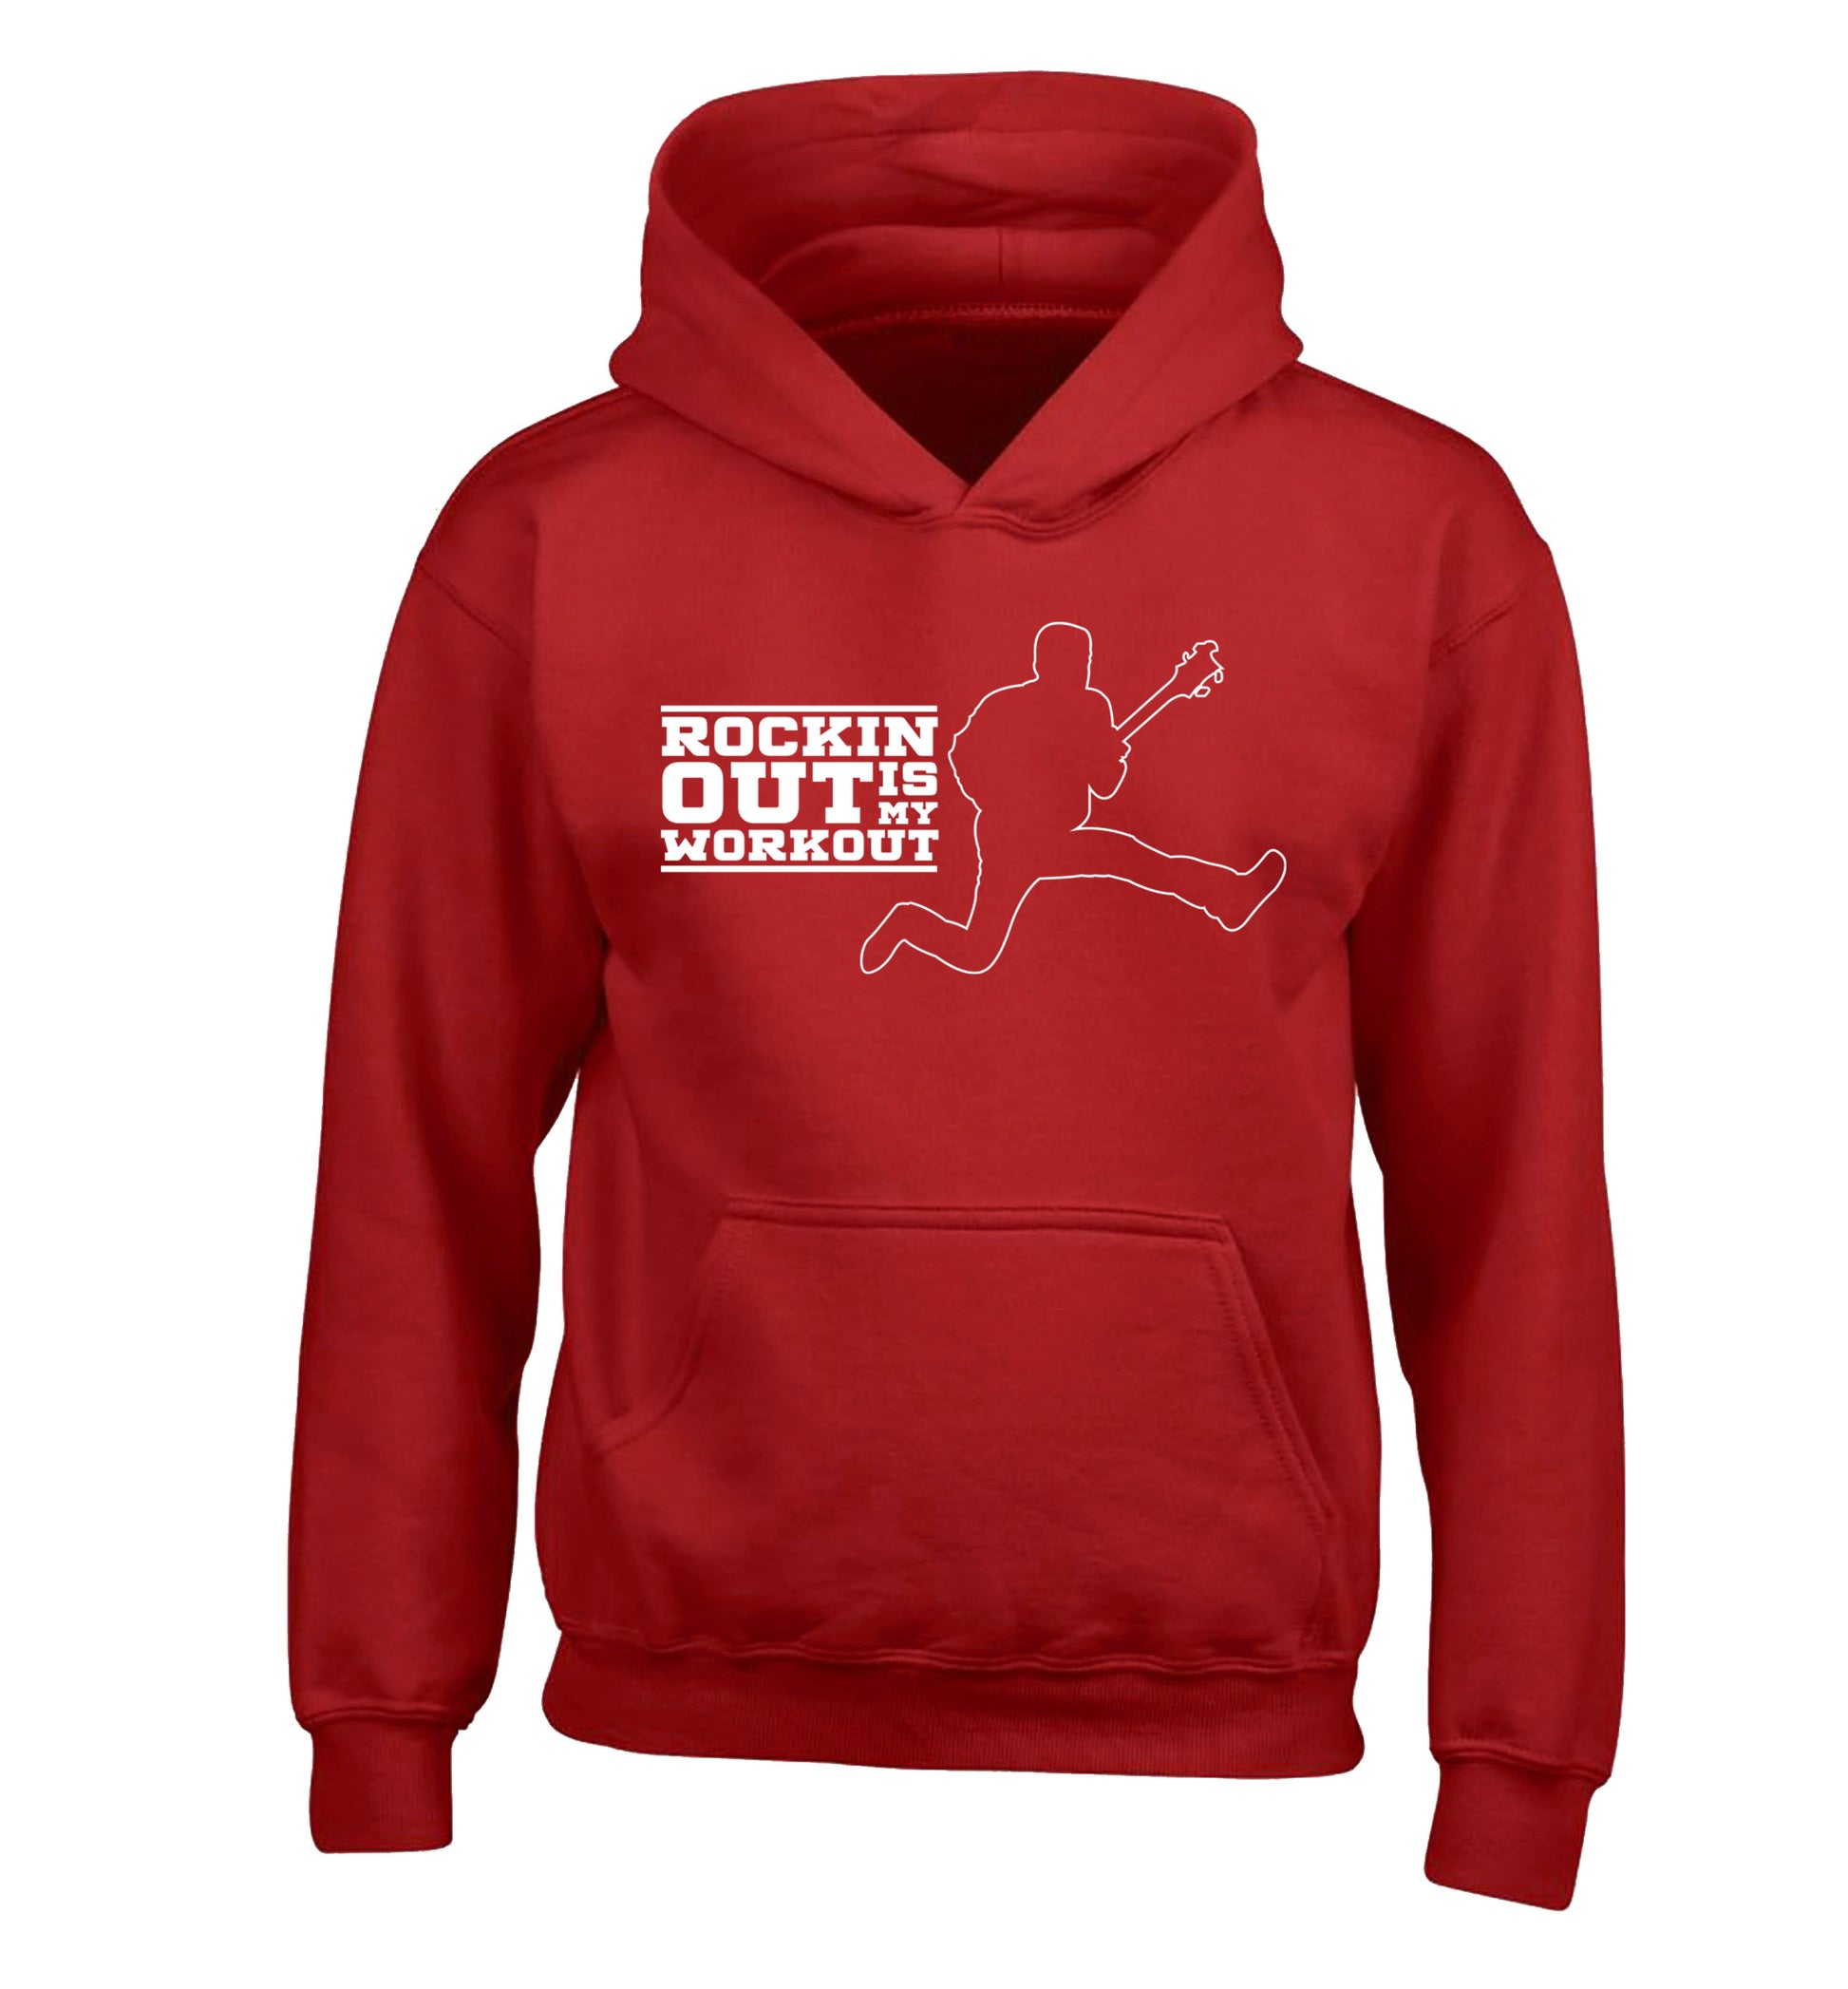 Rockin out is my workout children's red hoodie 12-13 Years